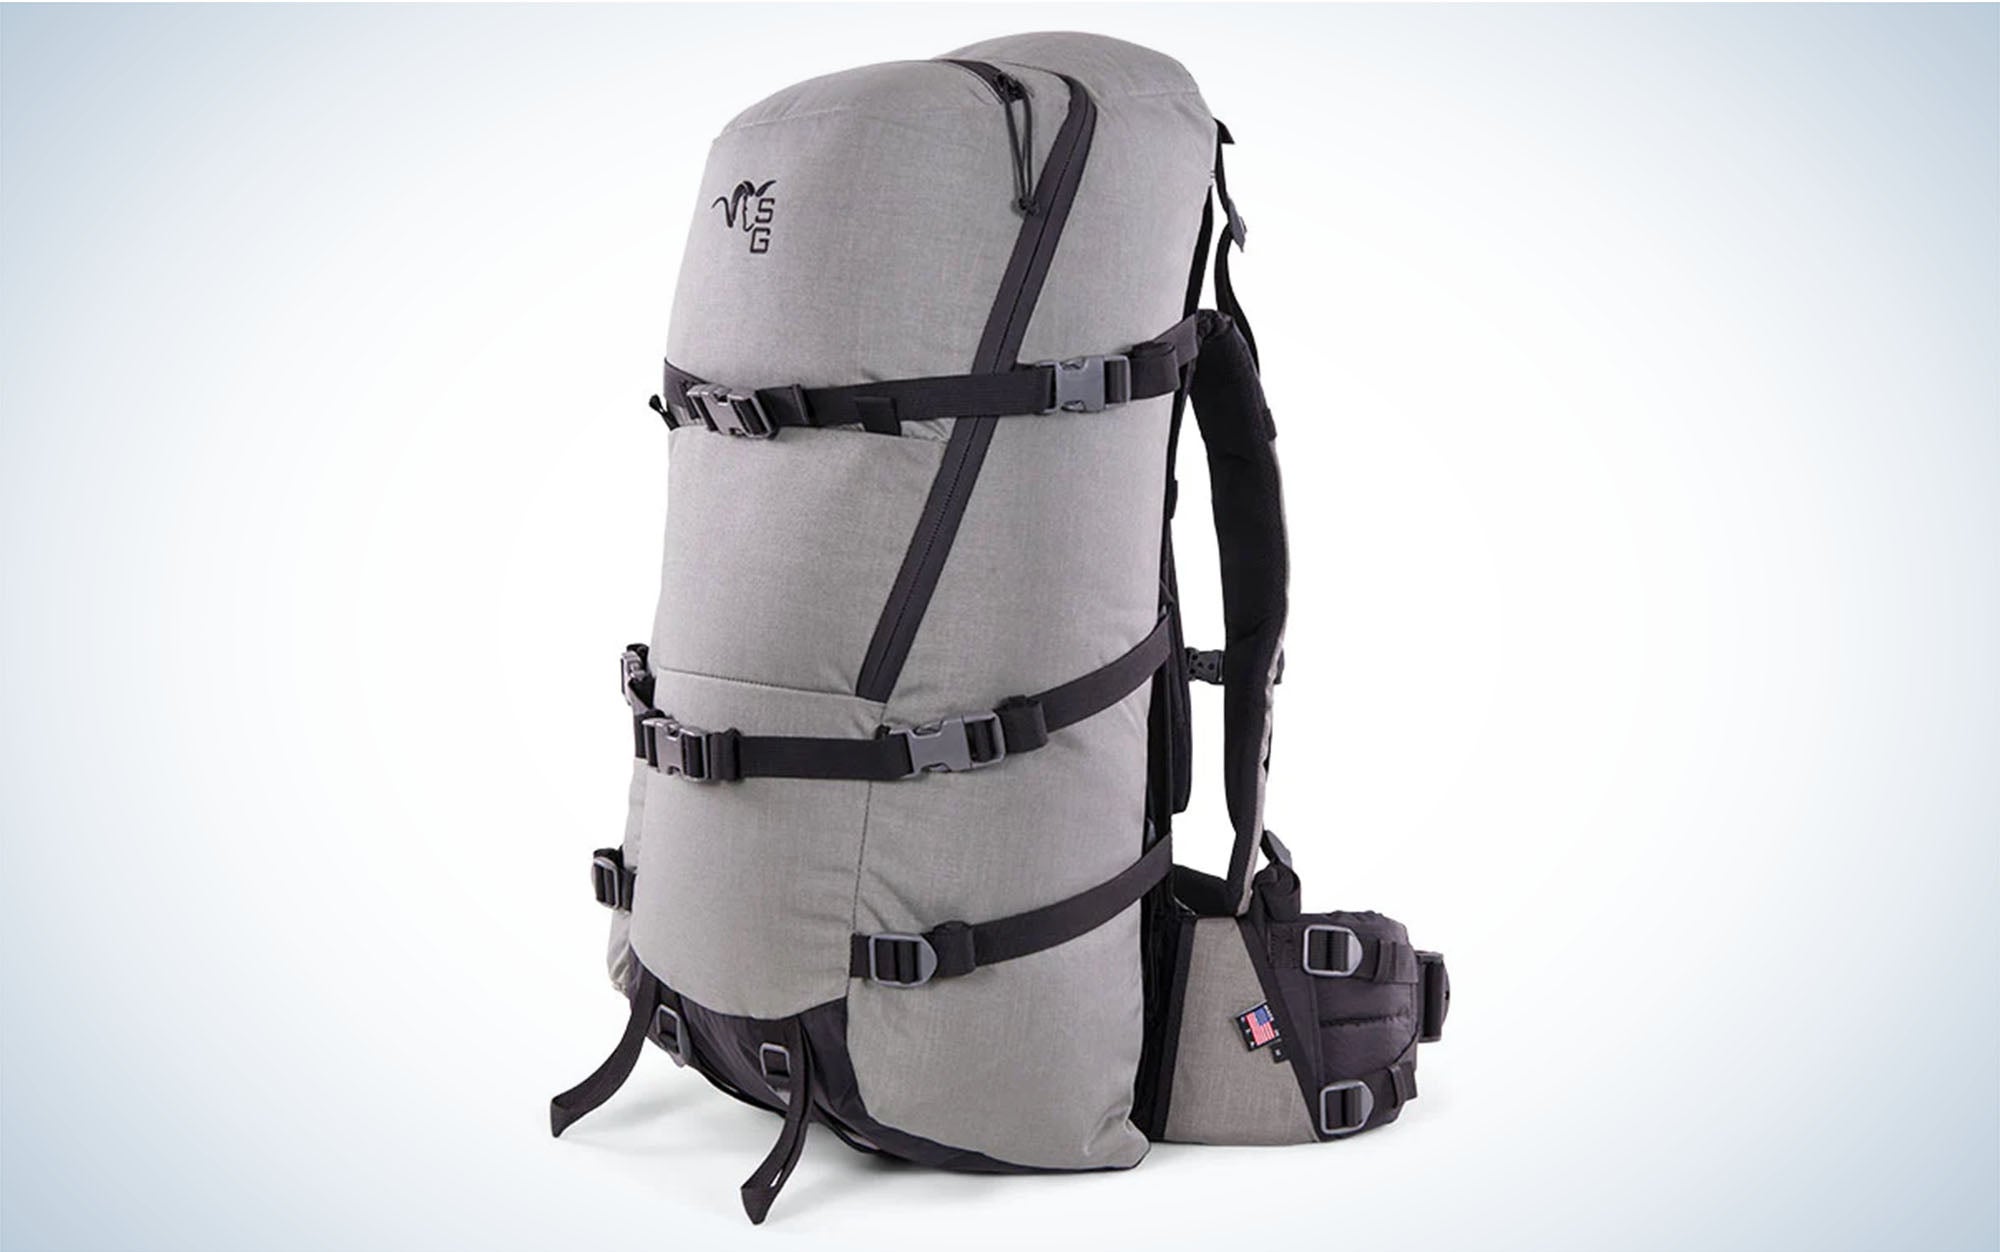 The Stone Glacier Solo is the best ultralight hunting backpack for backpack hunts.